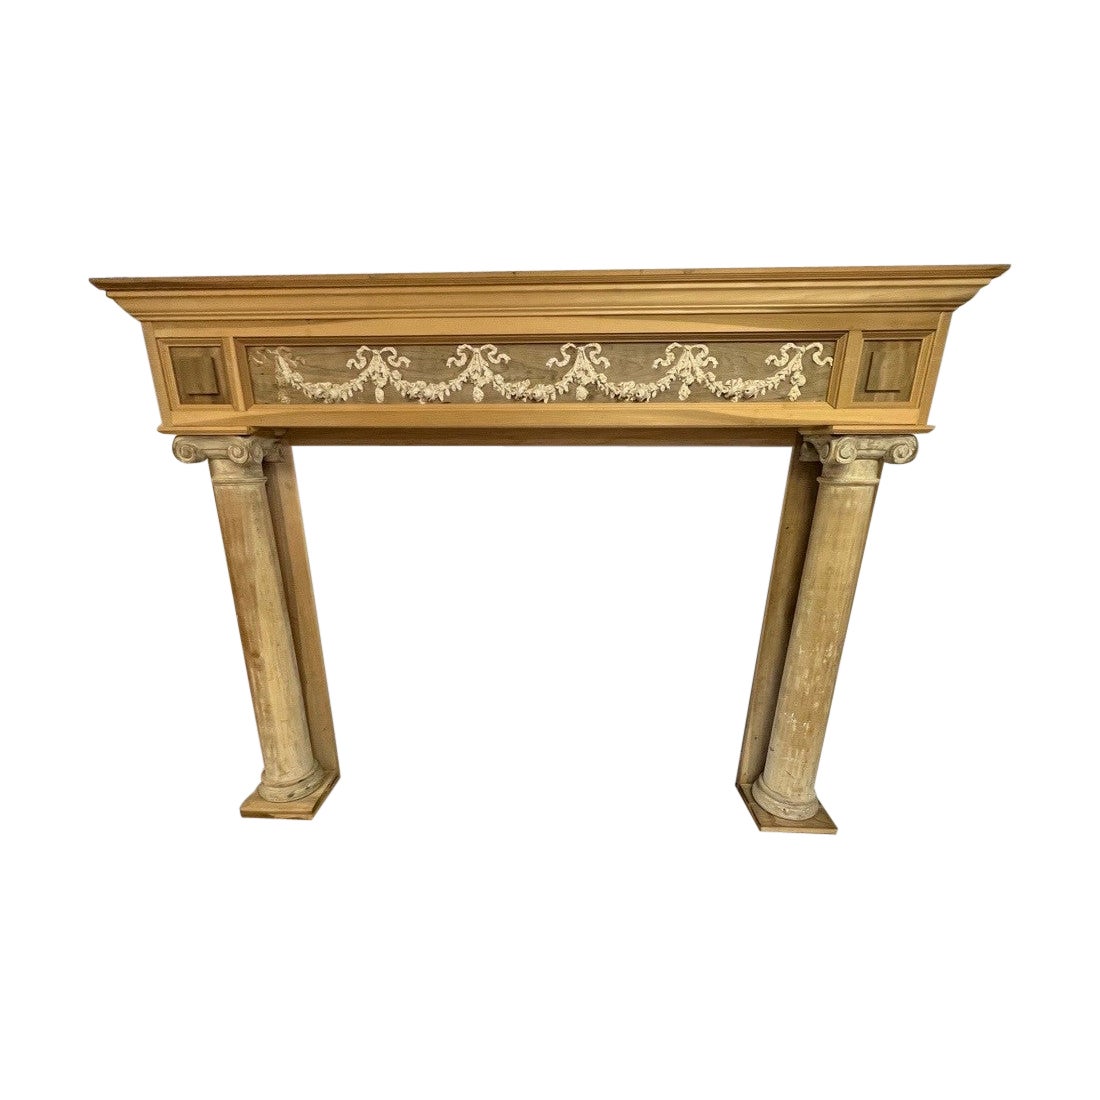 Vintage Wood Fireplace Mantel with Antique Carvings and Columns with Capitals For Sale